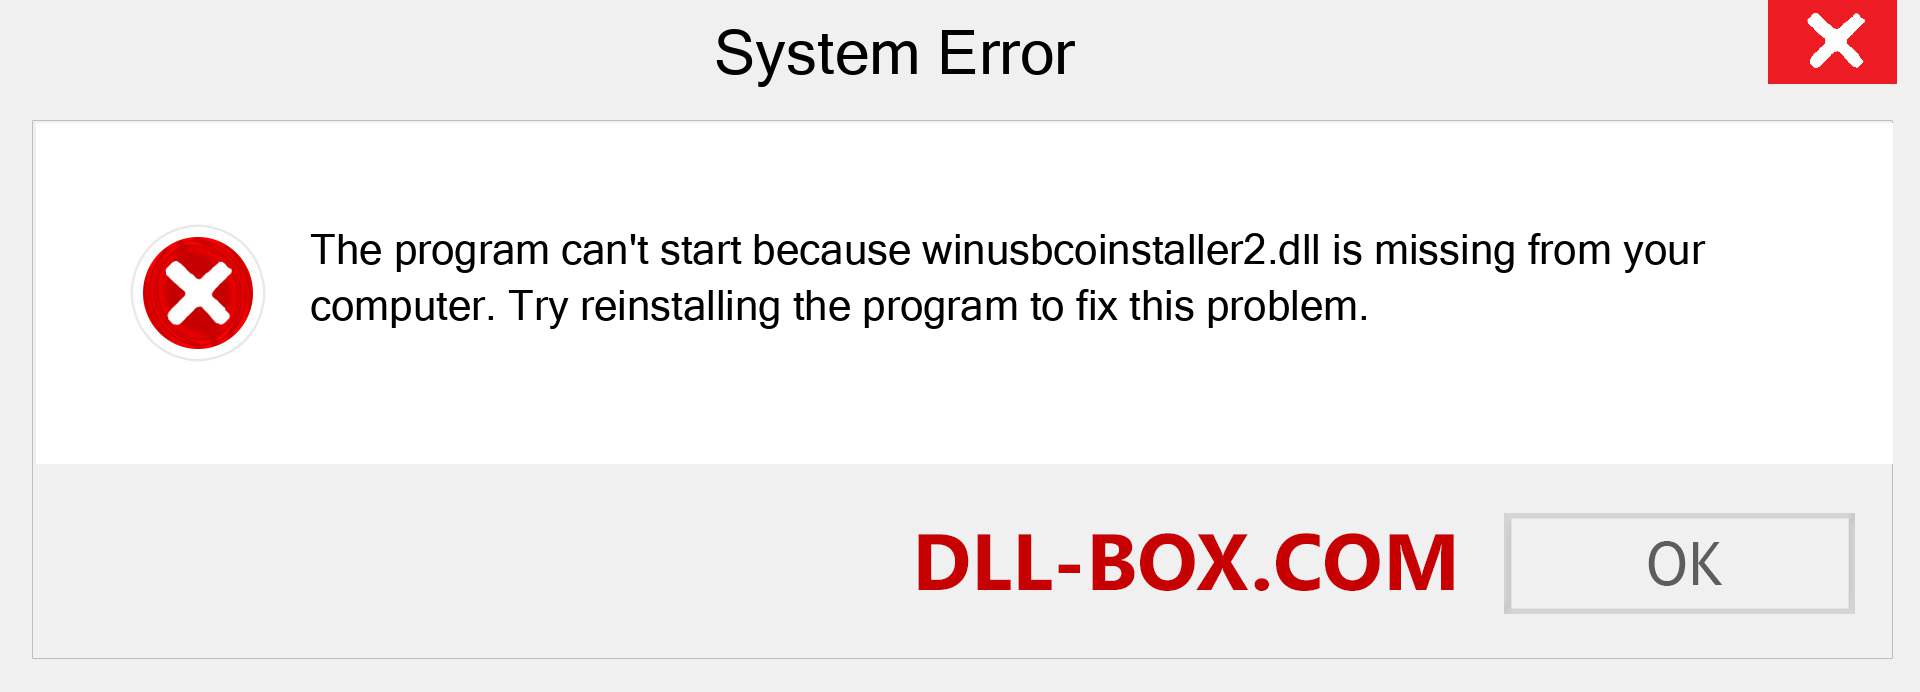  winusbcoinstaller2.dll file is missing?. Download for Windows 7, 8, 10 - Fix  winusbcoinstaller2 dll Missing Error on Windows, photos, images